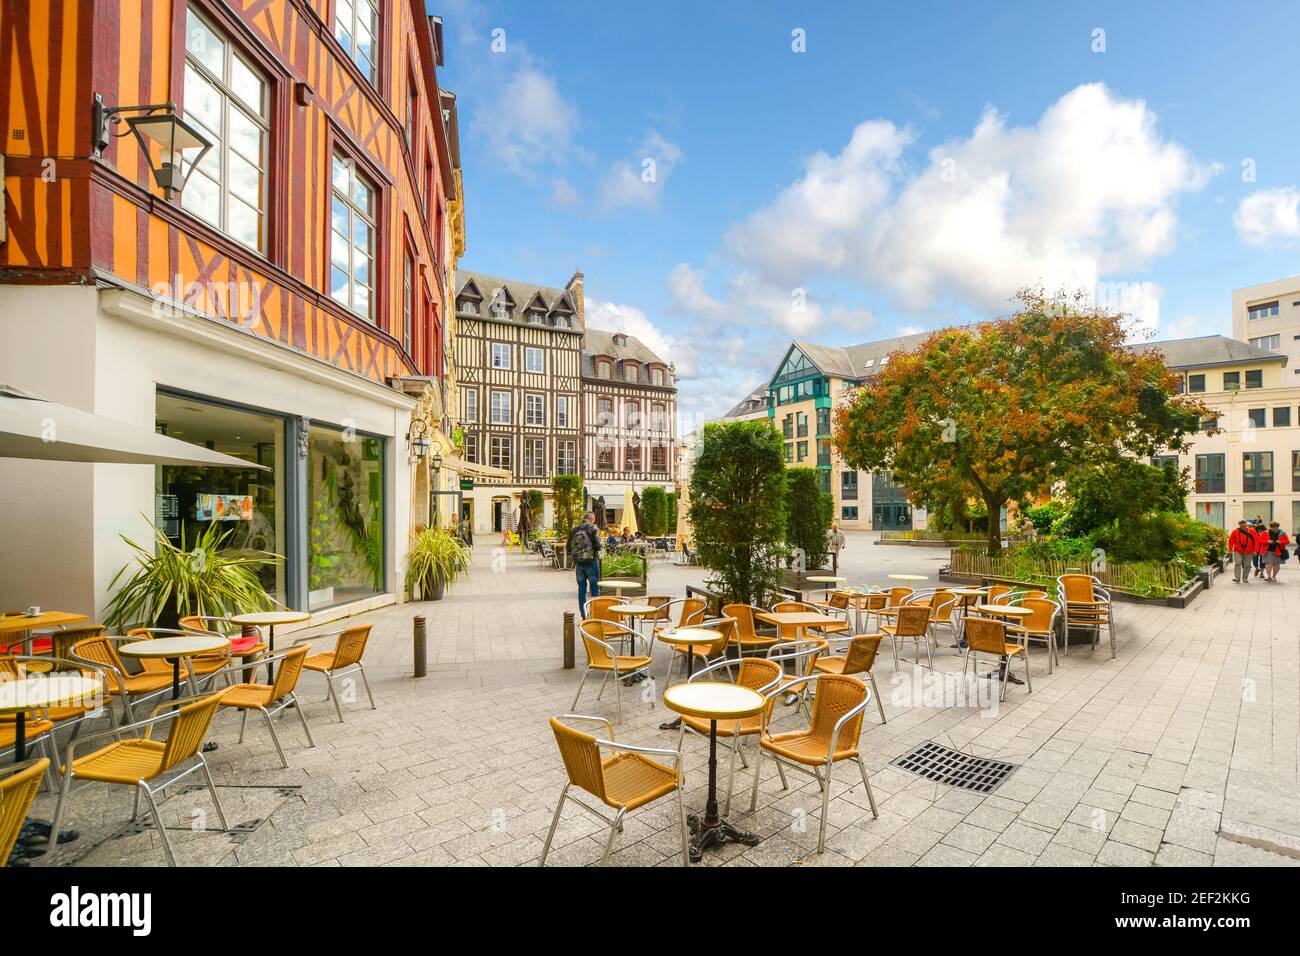 Timber frame homes line a town square in the medieval city of Rouen France with shops, a sidewalk cafe and tourists enjoying a sunny autumn day Stock Photo